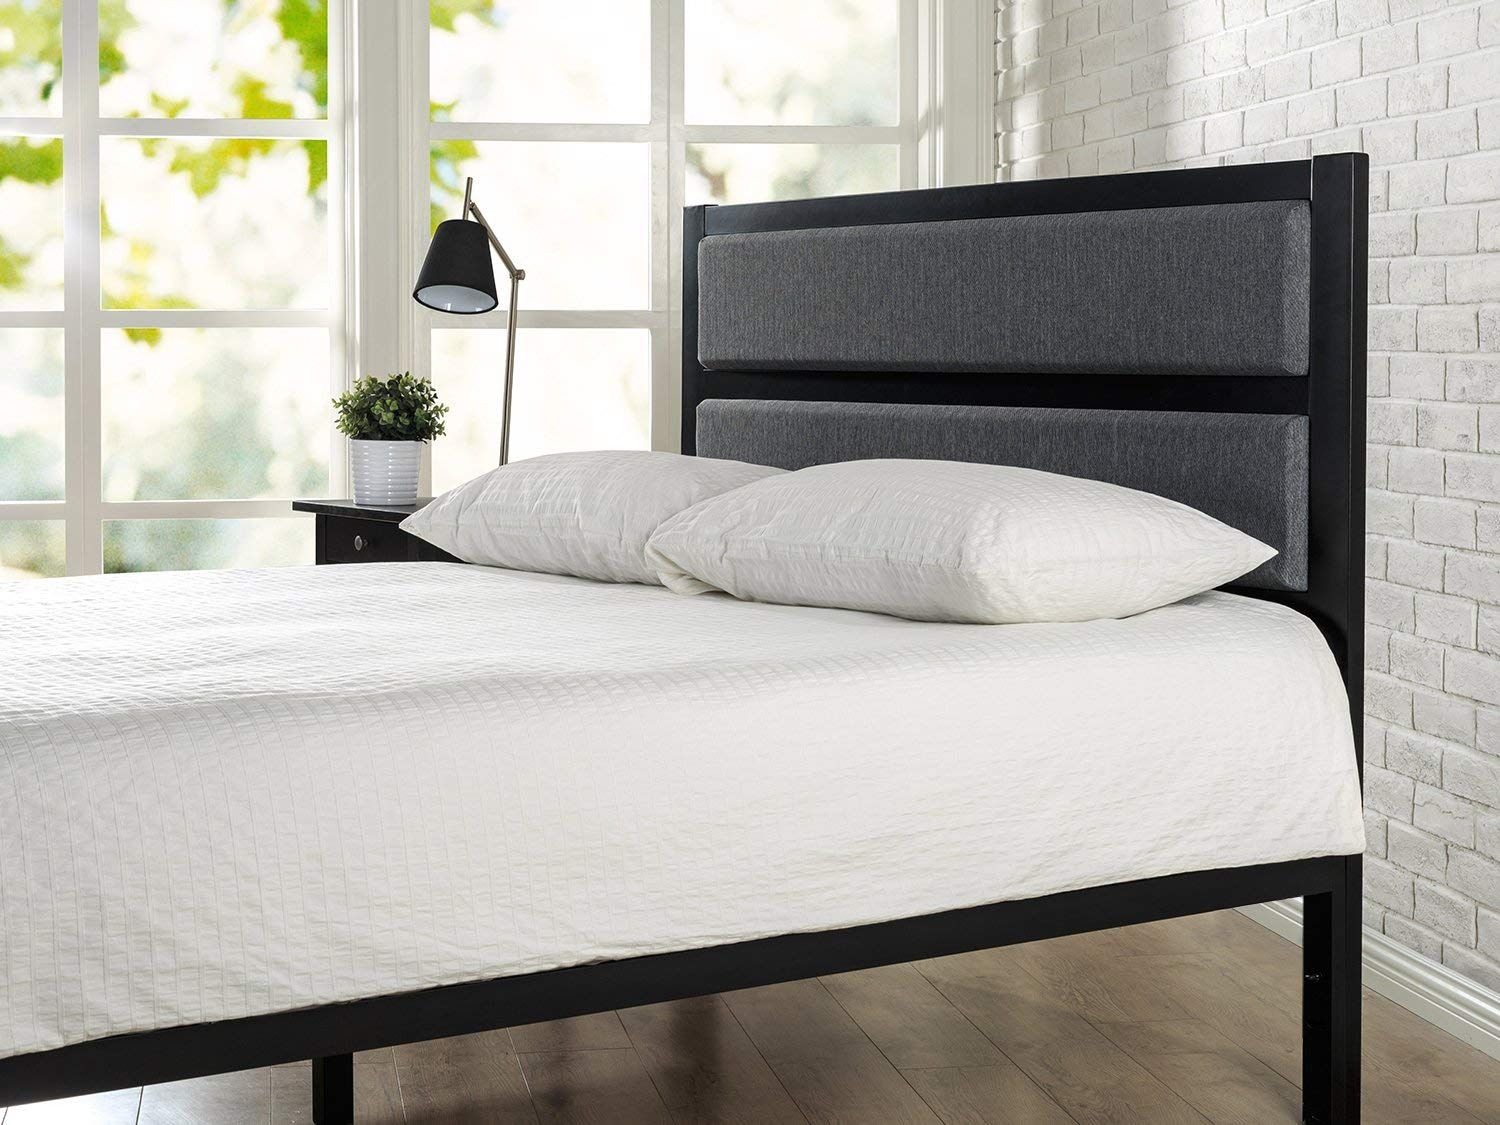 12 Best Headboards 2019 The Strategist, How To Bolt A Metal Headboard The Wall